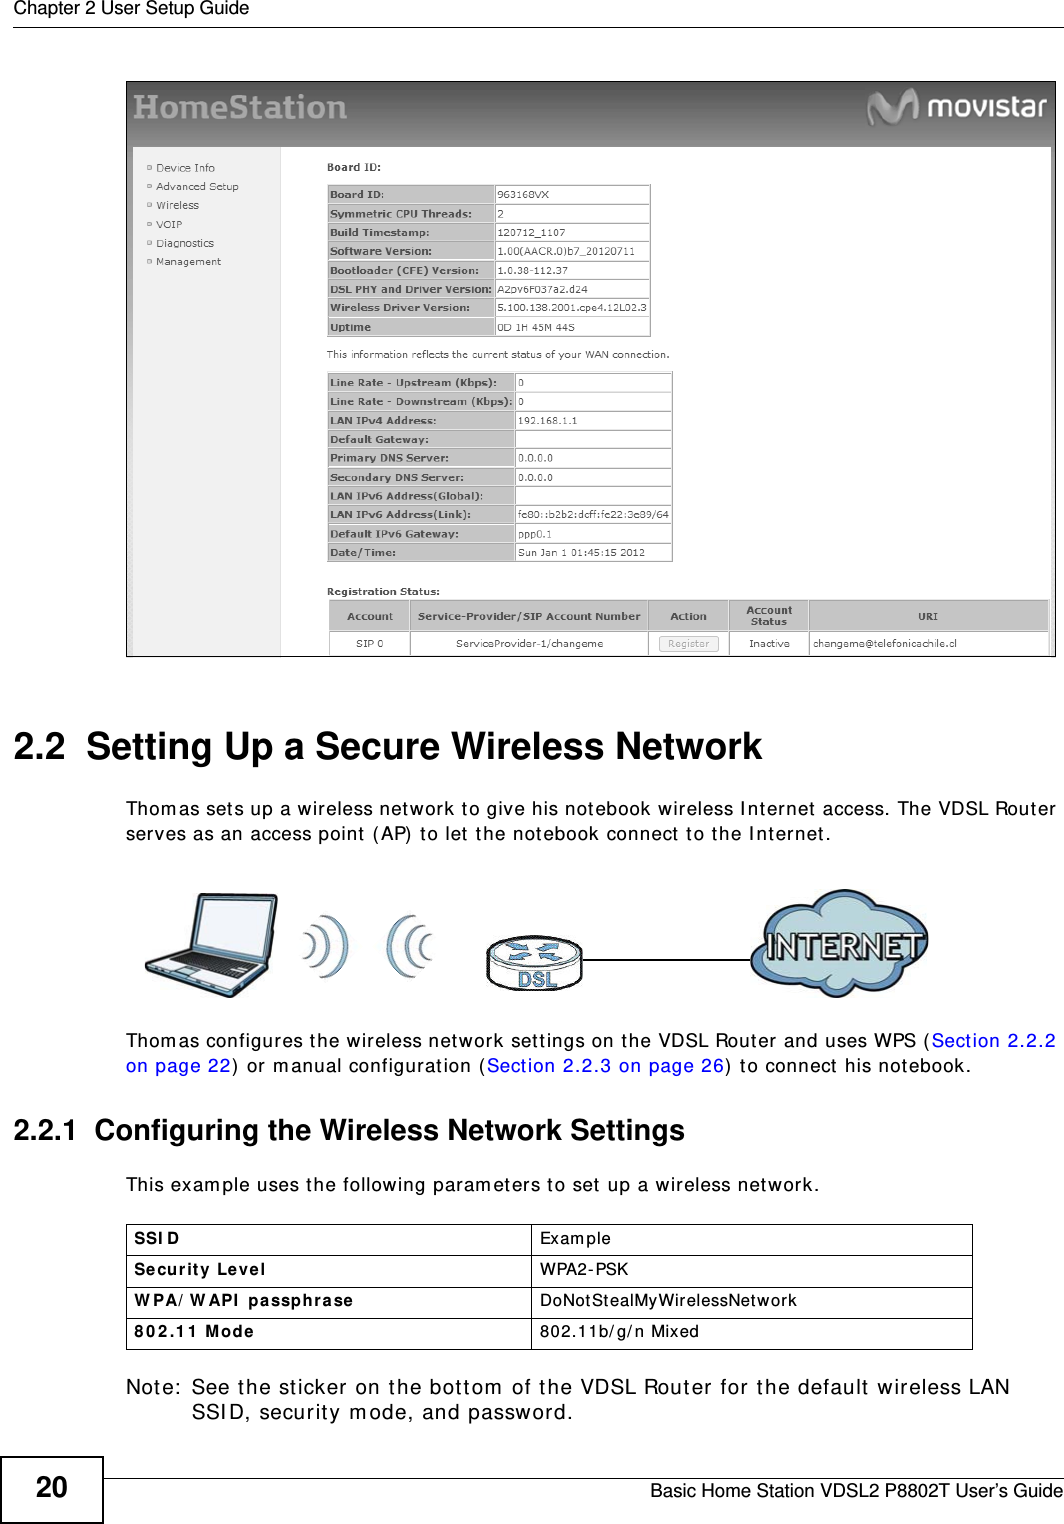 Chapter 2 User Setup GuideBasic Home Station VDSL2 P8802T User’s Guide202.2  Setting Up a Secure Wireless NetworkThom as set s up a wireless net work t o give his not ebook wireless I nt ernet  access. The VDSL Router serves as an access point ( AP)  to let t he not ebook connect  to the I nt ernet.Thom as configures t he wireless net work set t ings on t he VDSL Router and uses WPS ( Section 2.2.2 on page 22) or m anual configurat ion (Sect ion 2.2.3 on page 26)  to connect  his notebook.2.2.1  Configuring the Wireless Network SettingsThis exam ple uses t he following paramet ers to set  up a wireless net work.Note:  See t he sticker on the bottom  of the VDSL Router for the default wireless LAN SSI D, securit y m ode, and password.SSI D Exam pleSecu rity Leve l WPA2 - PSKW PA/ W API  pa ssph rase DoNot StealMyWirelessNetwor k8 0 2 .1 1  M ode 802.11b/ g/ n Mixed